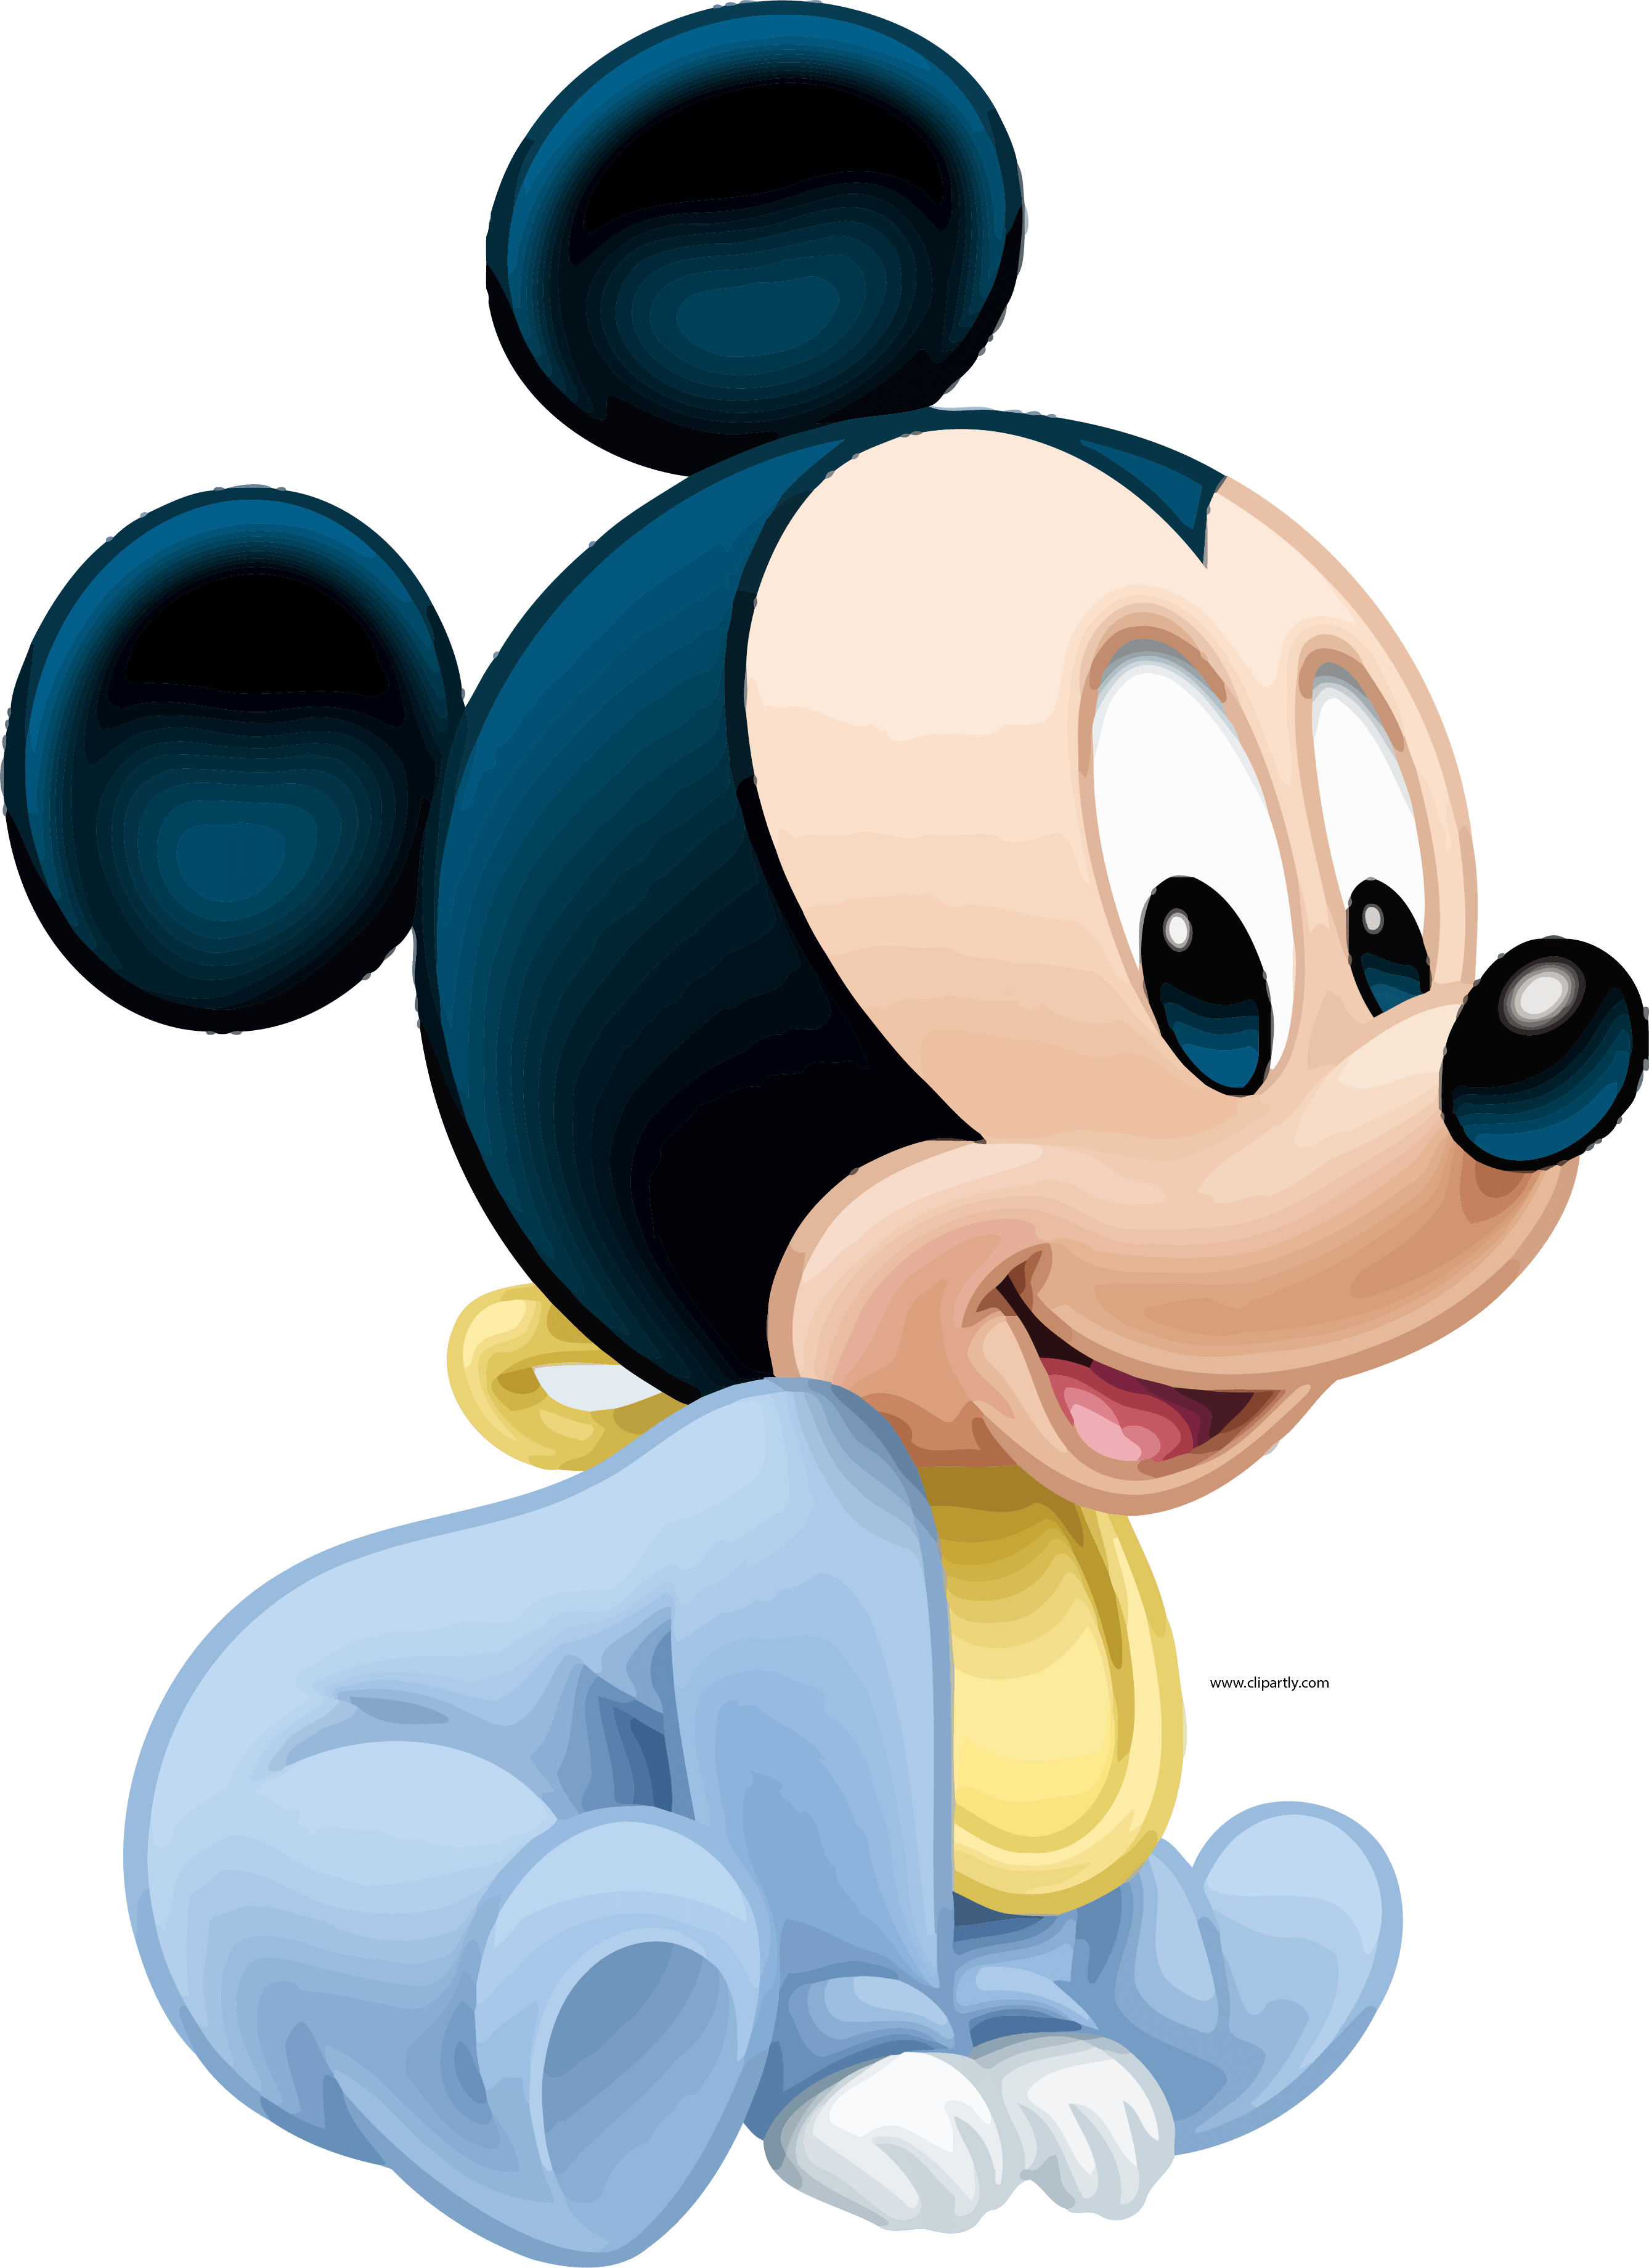 Baby Mickey Mouse Iphone Wallpapers Top Free Baby Mickey Mouse